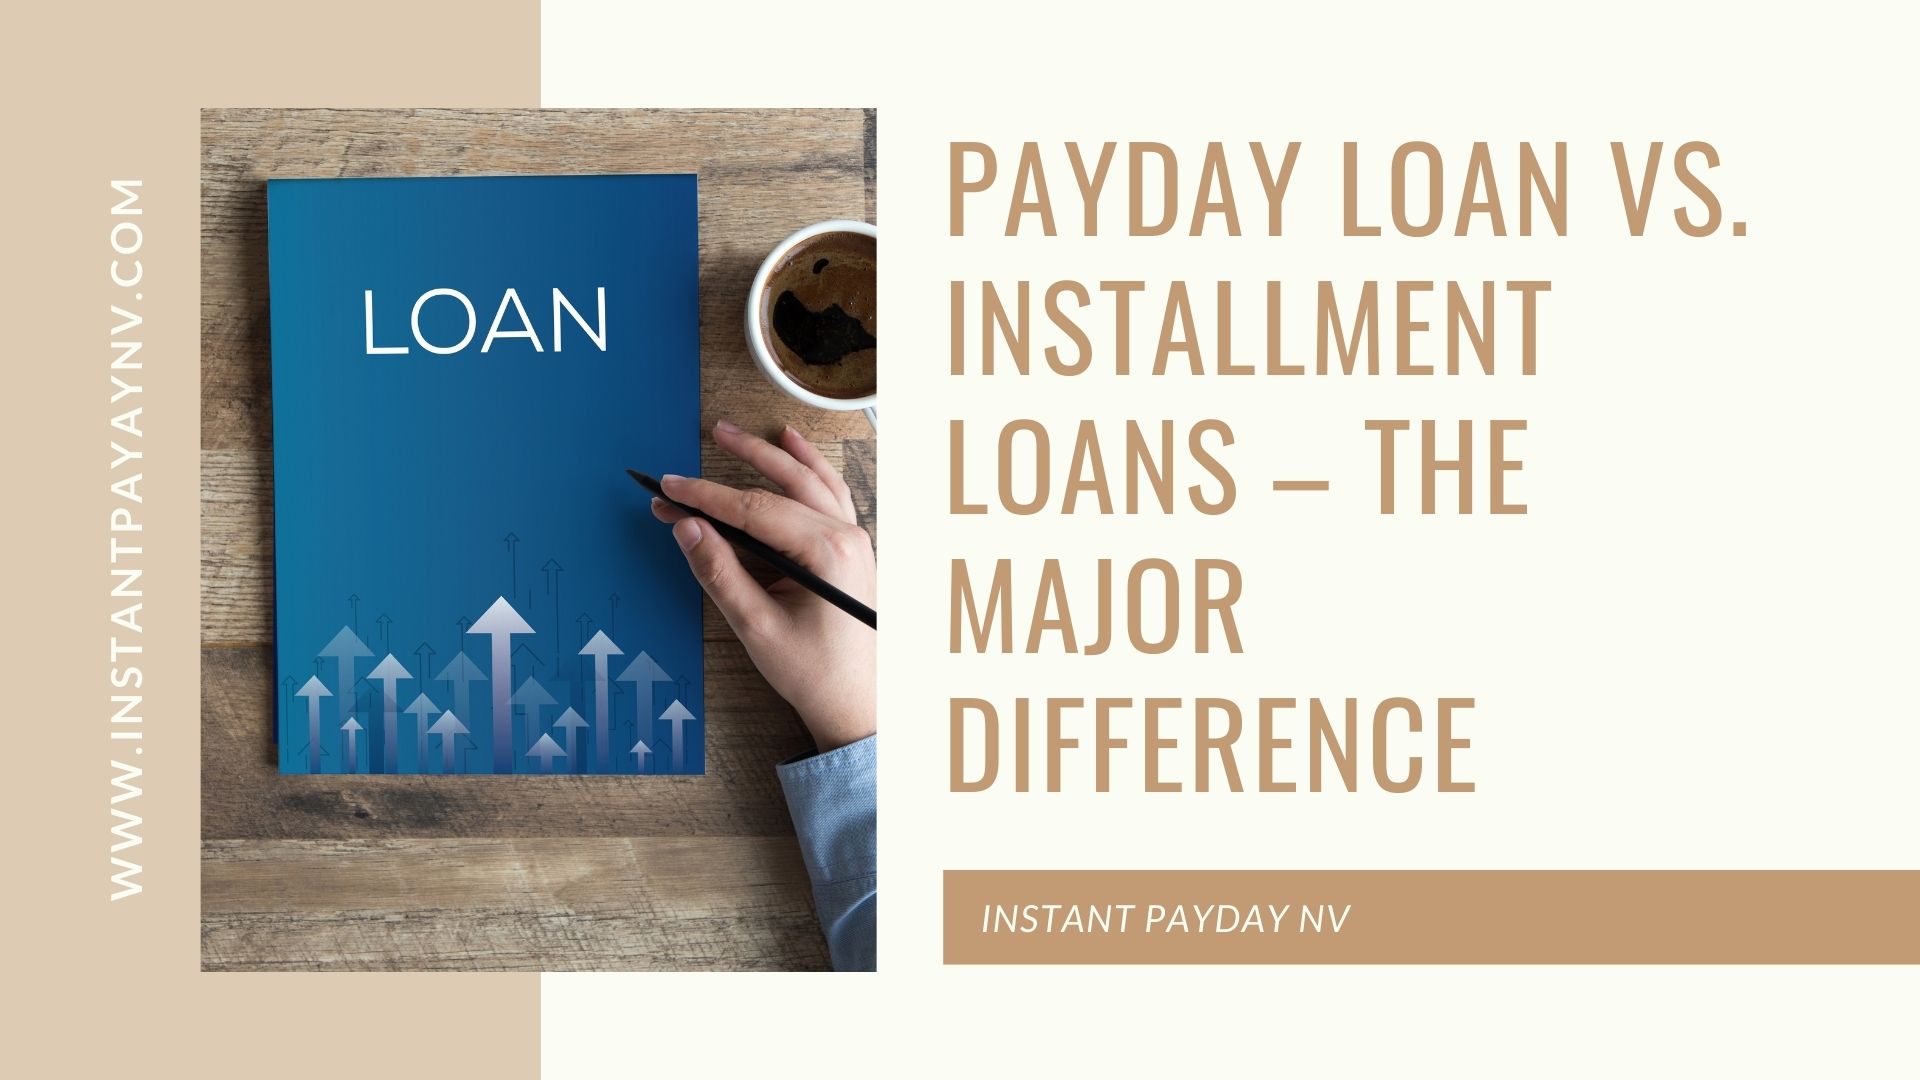 Payday Loan vs. Installment Loans – The Major Difference